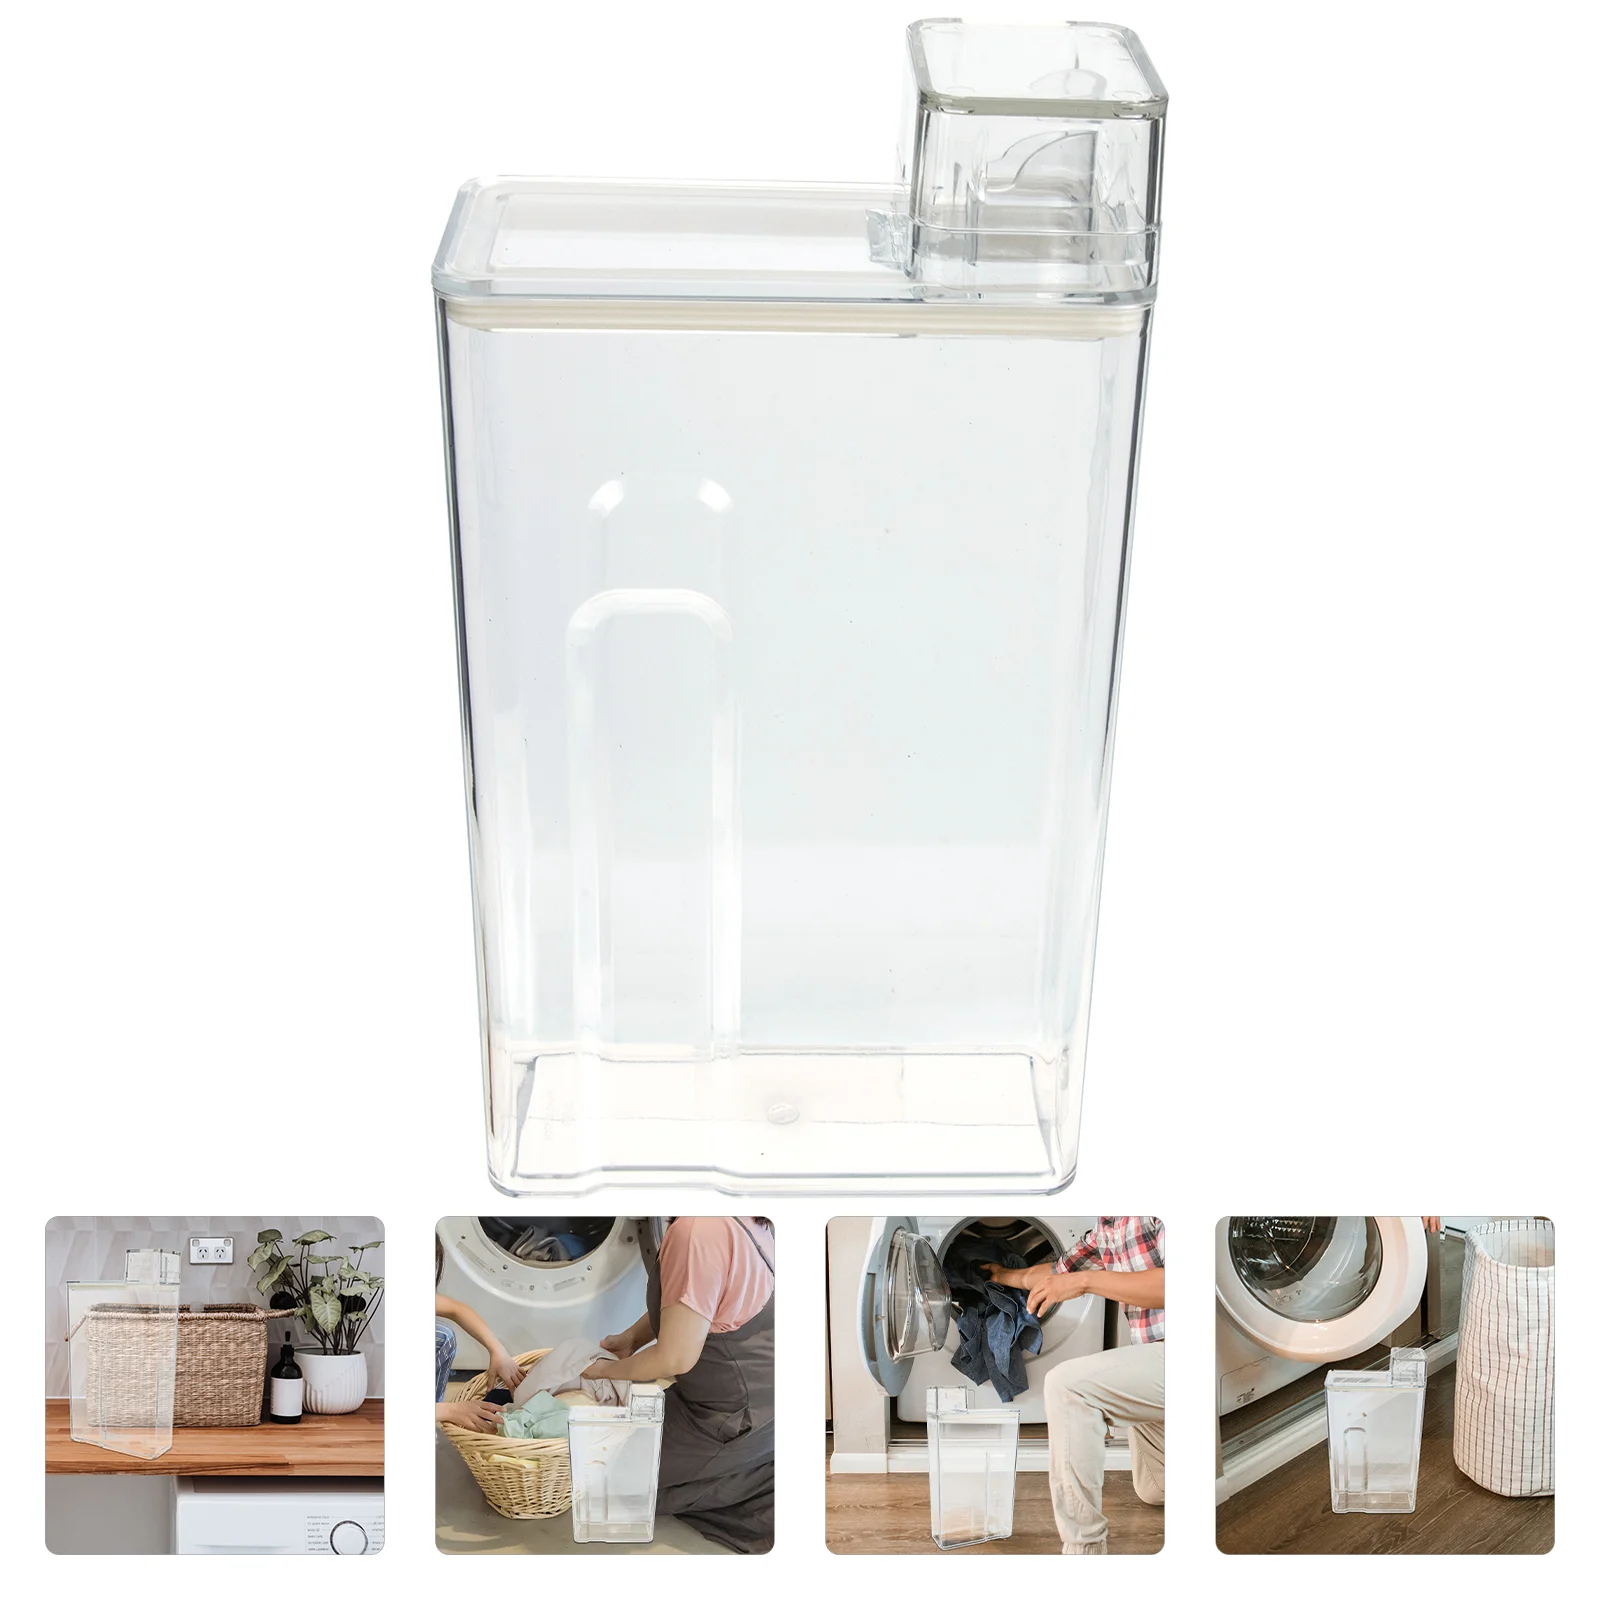 

Laundry Detergent Storage Box Refillable Lotion Holder Clear Plastic Container Powder Bottle Sub Food Washing